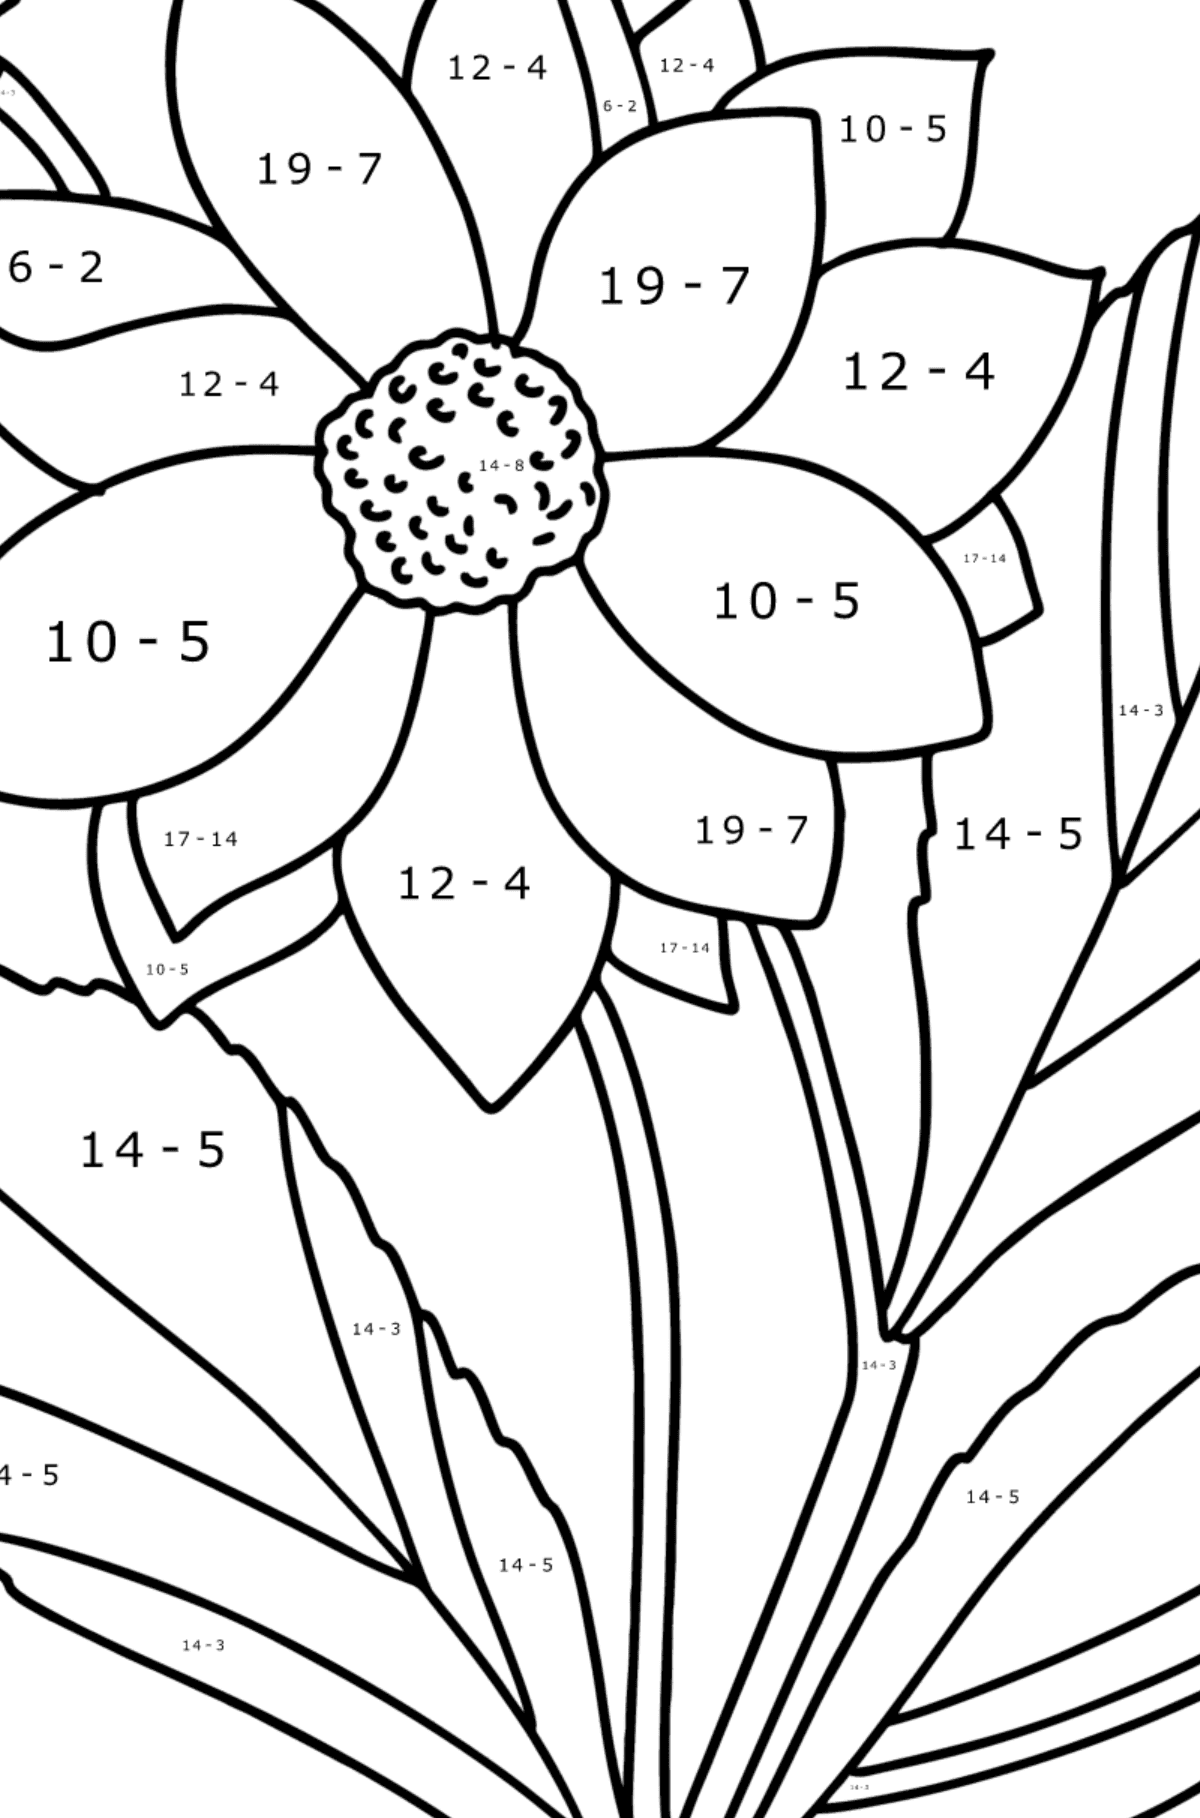 Dahlias coloring page - Math Coloring - Subtraction for Kids